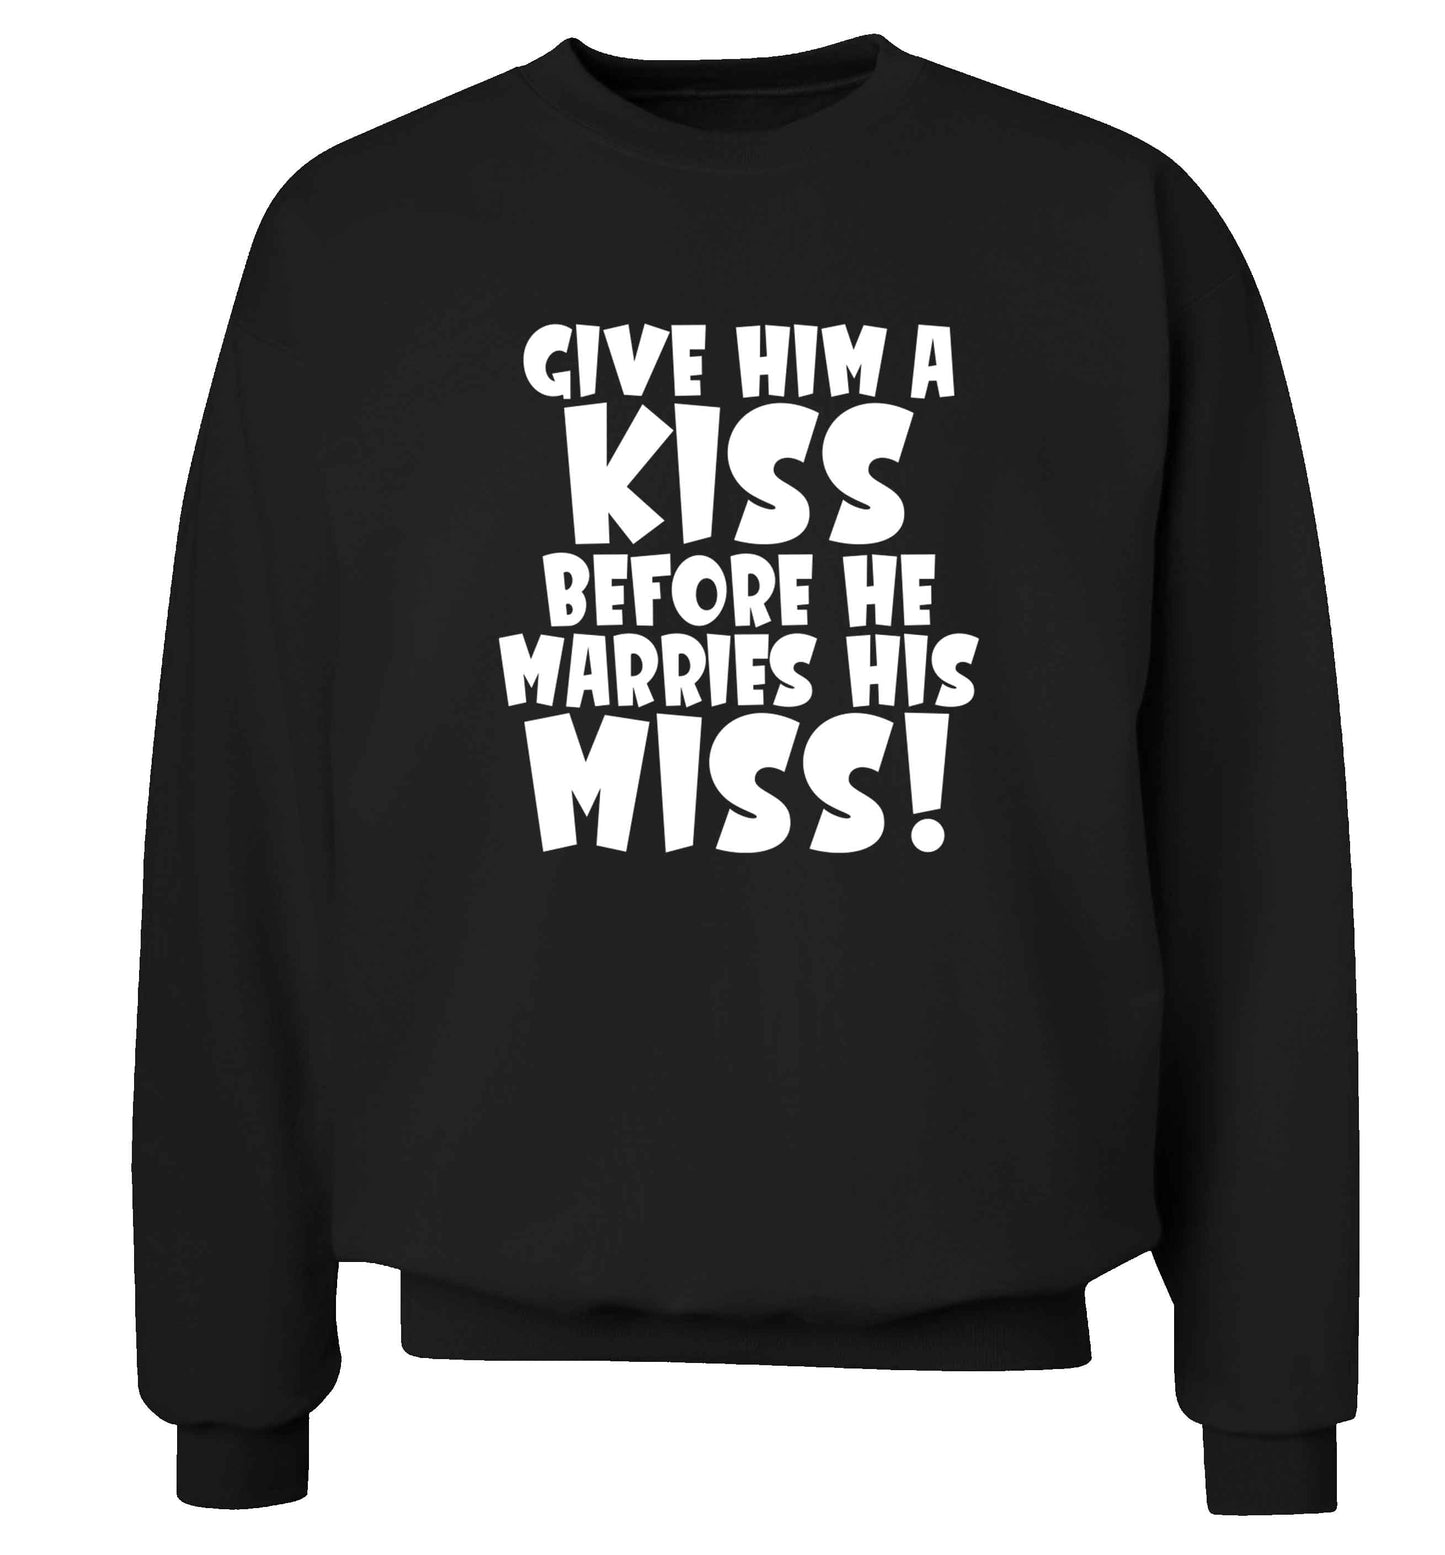 Give him a kiss before he marries his miss adult's unisex black sweater 2XL